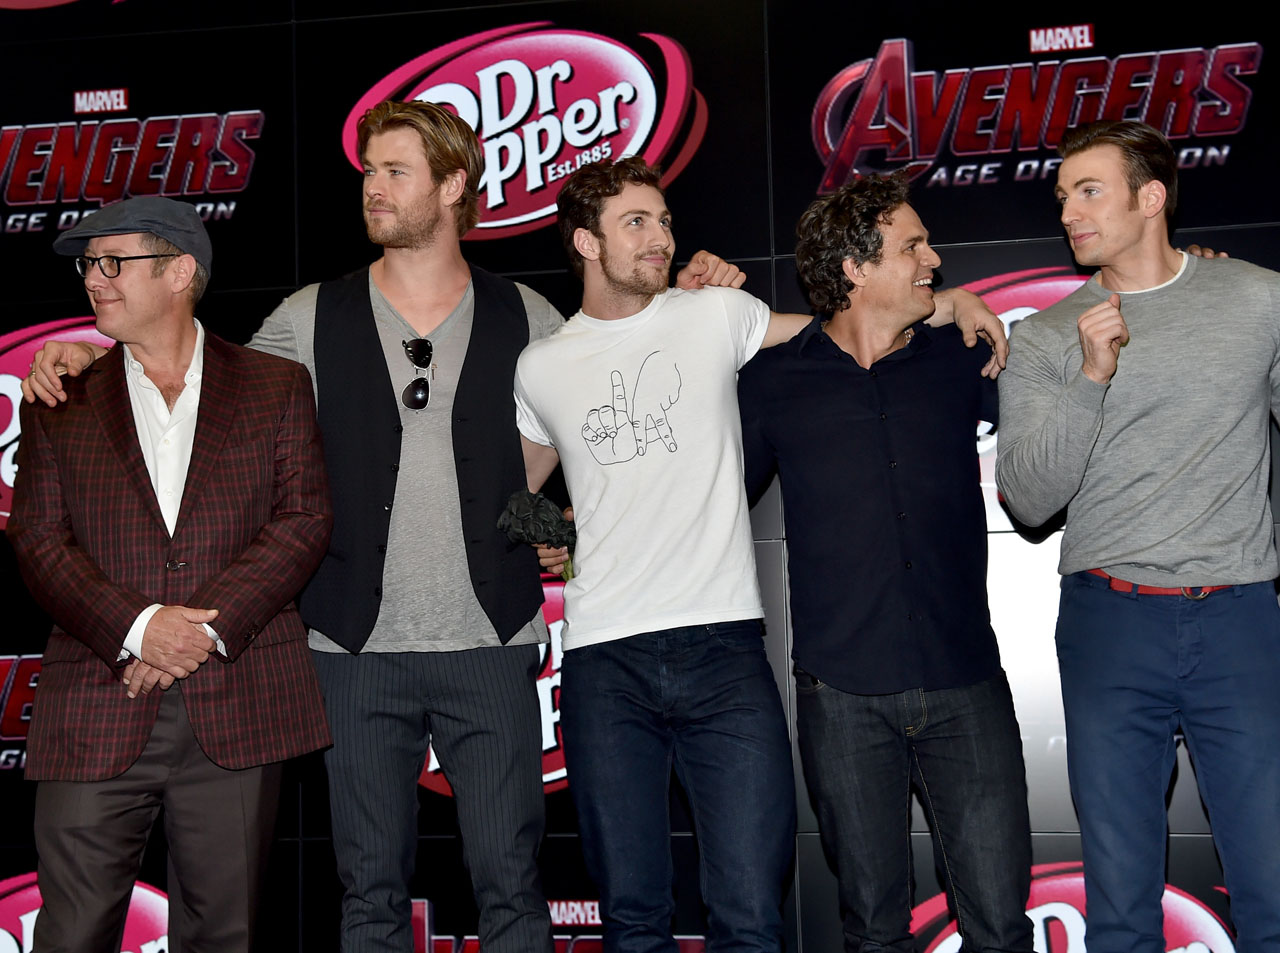 SAN DIEGO, CA - JULY 26: (L-R) Actors James Spader, Chris Hemsworth, Aaron Taylor-Johnson, Mark Ruffalo and Chris Evans onstage at Marvel's "Avengers: Age Of Ultron" Hall H Panel Booth Signing during Comic-Con International 2014 at San Diego Convention Center on July 26, 2014 in San Diego, California. (Photo by Alberto E. Rodriguez/Getty Images for Disney) *** Local Caption *** James Spader;Chris Hemsworth;Aaron Taylor-Johnson;Mark Ruffalo;Chris Evans